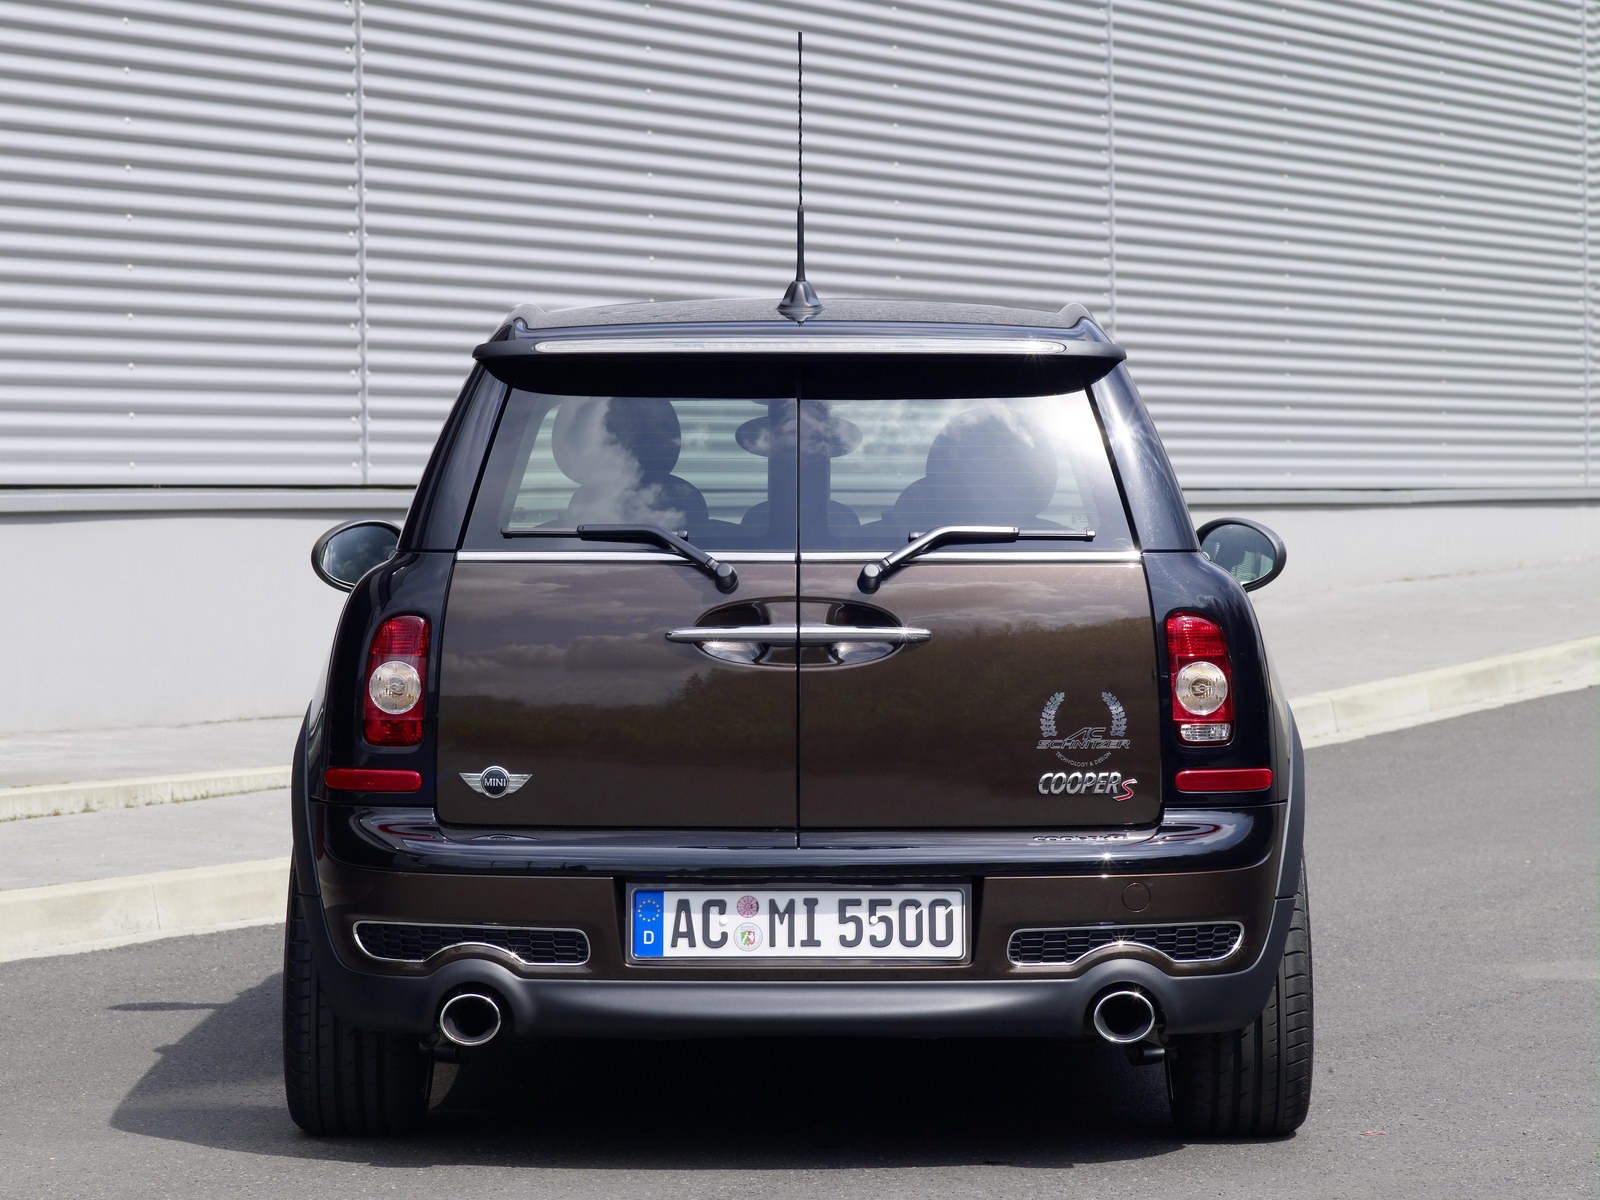 AC Schnitzer MINI Cooper S Clubman photos and wallpapers - tuningnews.